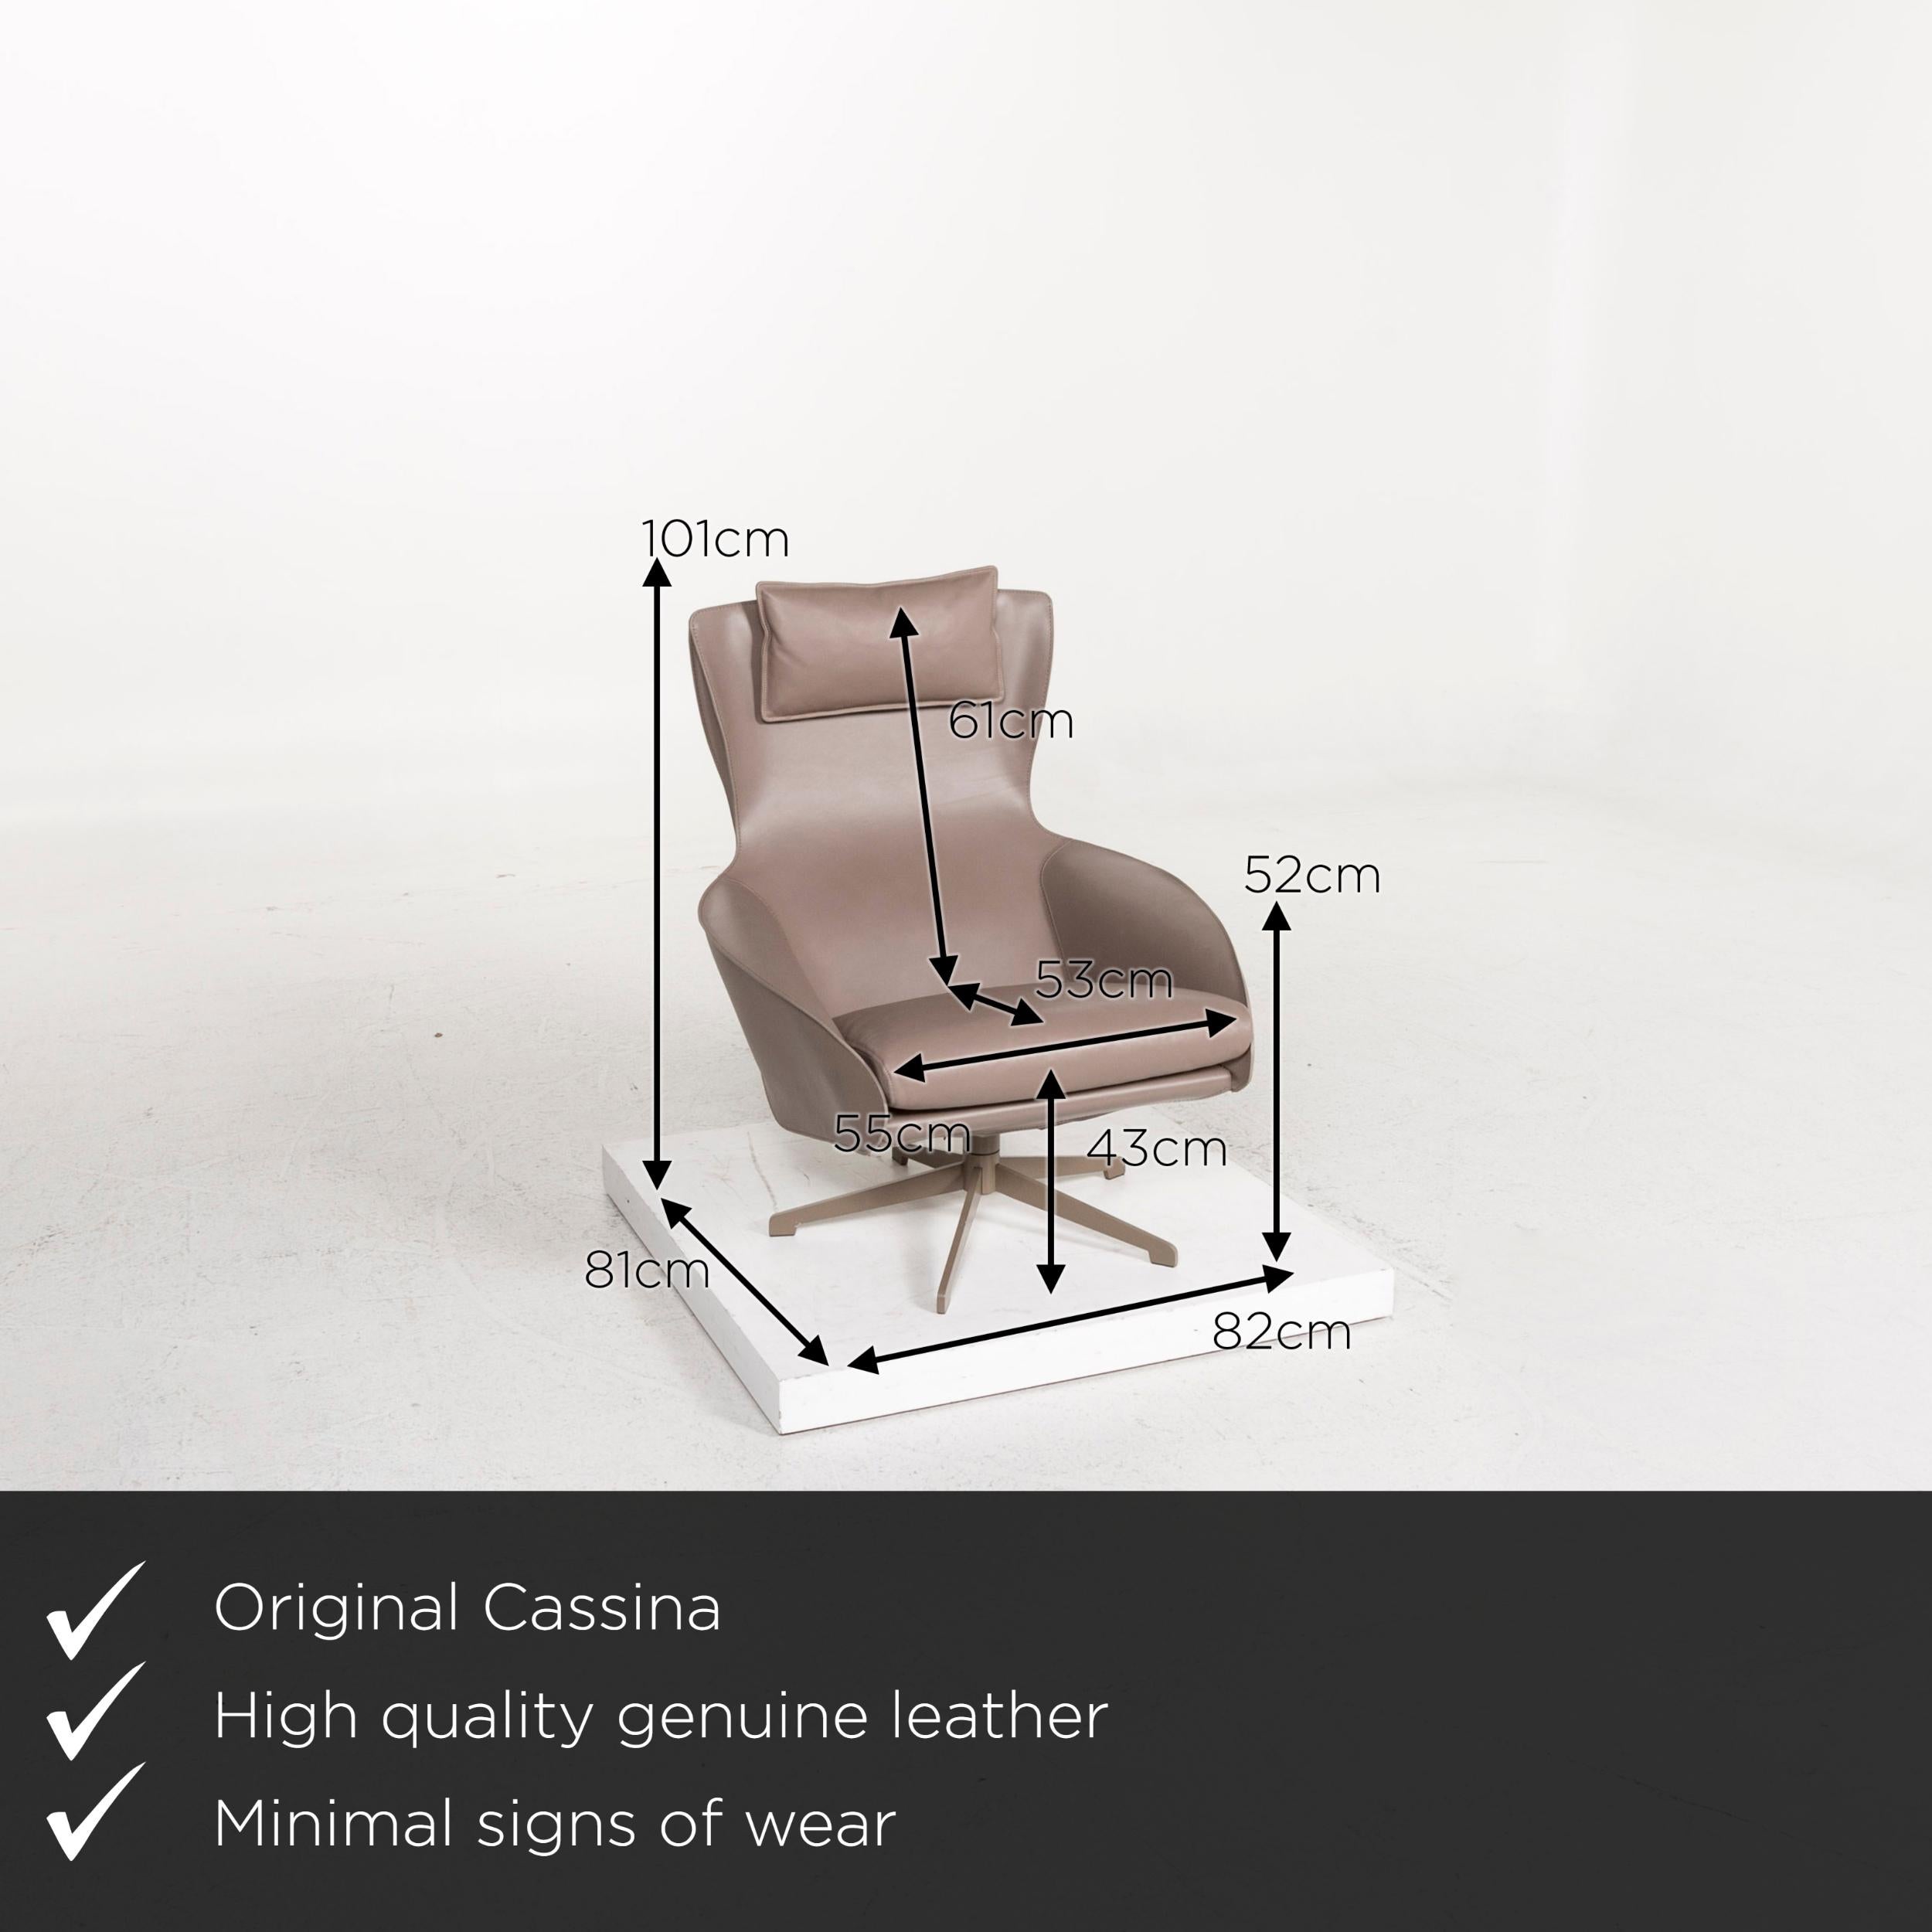 We present to you a Cassina Cab 423 leather armchair brown gray brown.
   
 

 Product measurements in centimeters:
 

Depth 81
Width 82
Height 101
Seat height 43
Rest height 52
Seat depth 53
Seat width 55
Back height 61.
   